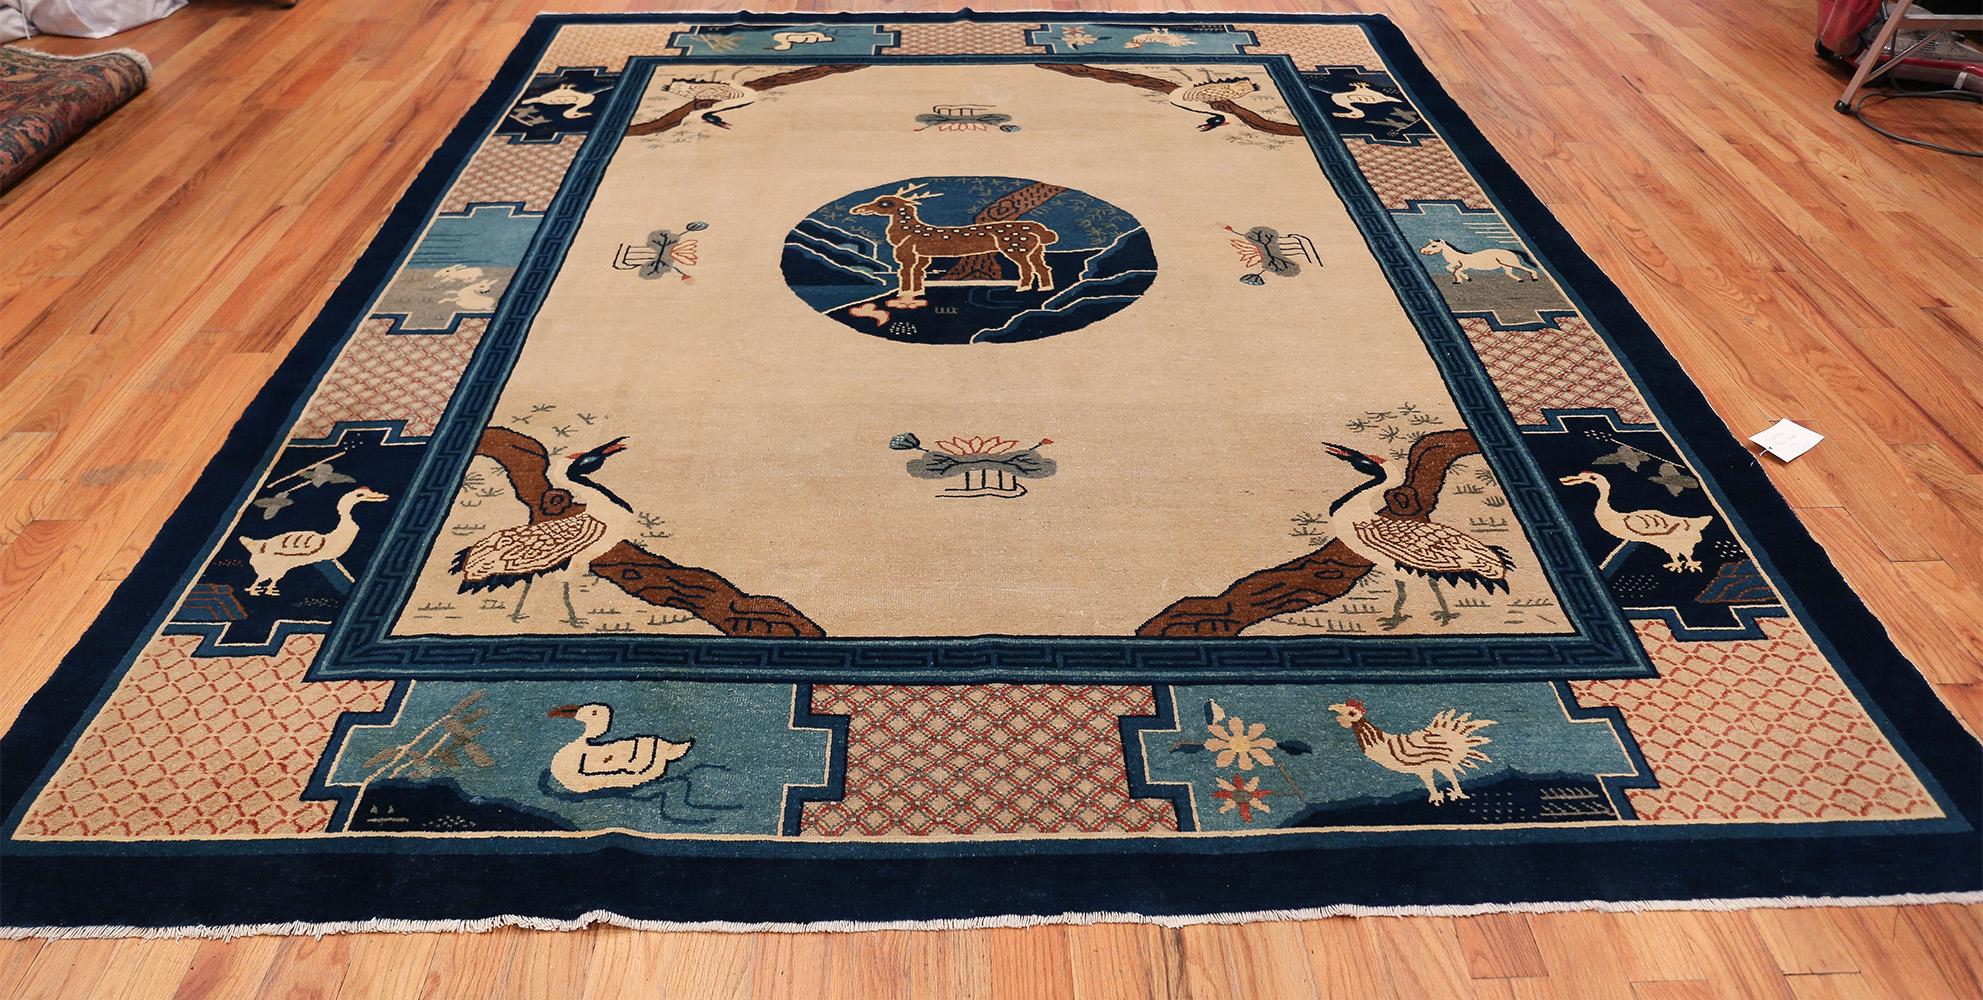 Magnificently Calm Antique Animal Motif Chinese Rug , Country of Origin / Rug Type: China, Circa Date: 1920. Size: 8 ft x 9 ft 8 in (2.44 m x 2.95 m)

This beautiful antique Chinese rug features a lovely animal motif set against a predominately